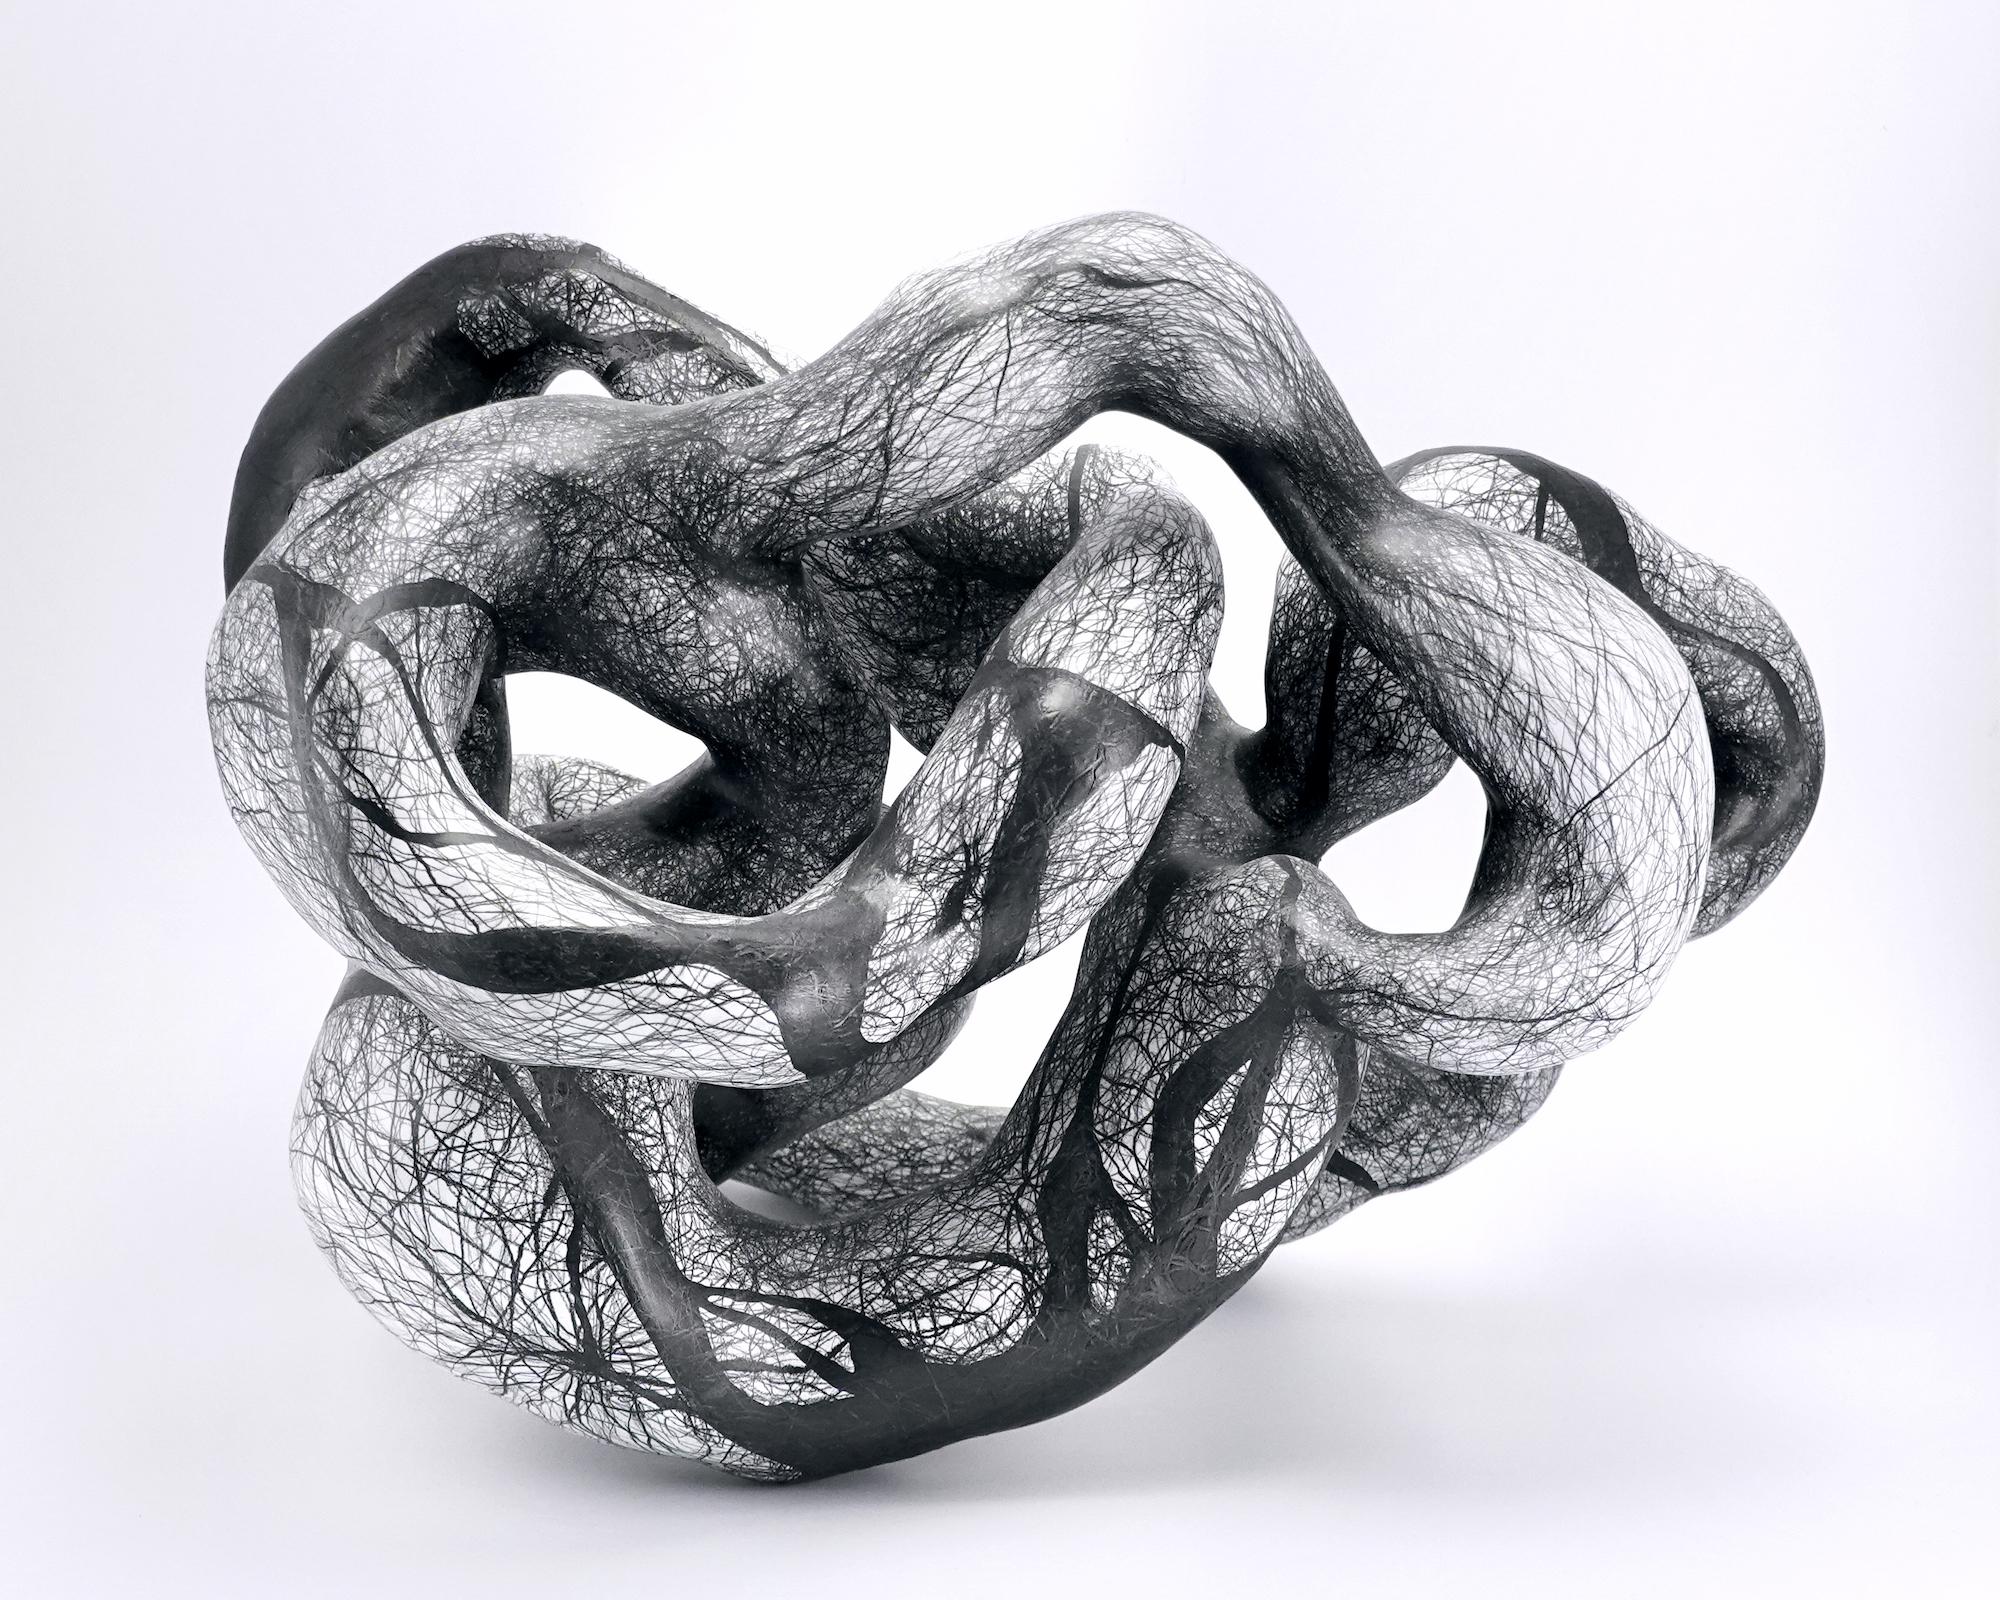 Abstract, Black and White Clay Sculpture: 'Twine' - Gray Abstract Sculpture by Judi Tavill